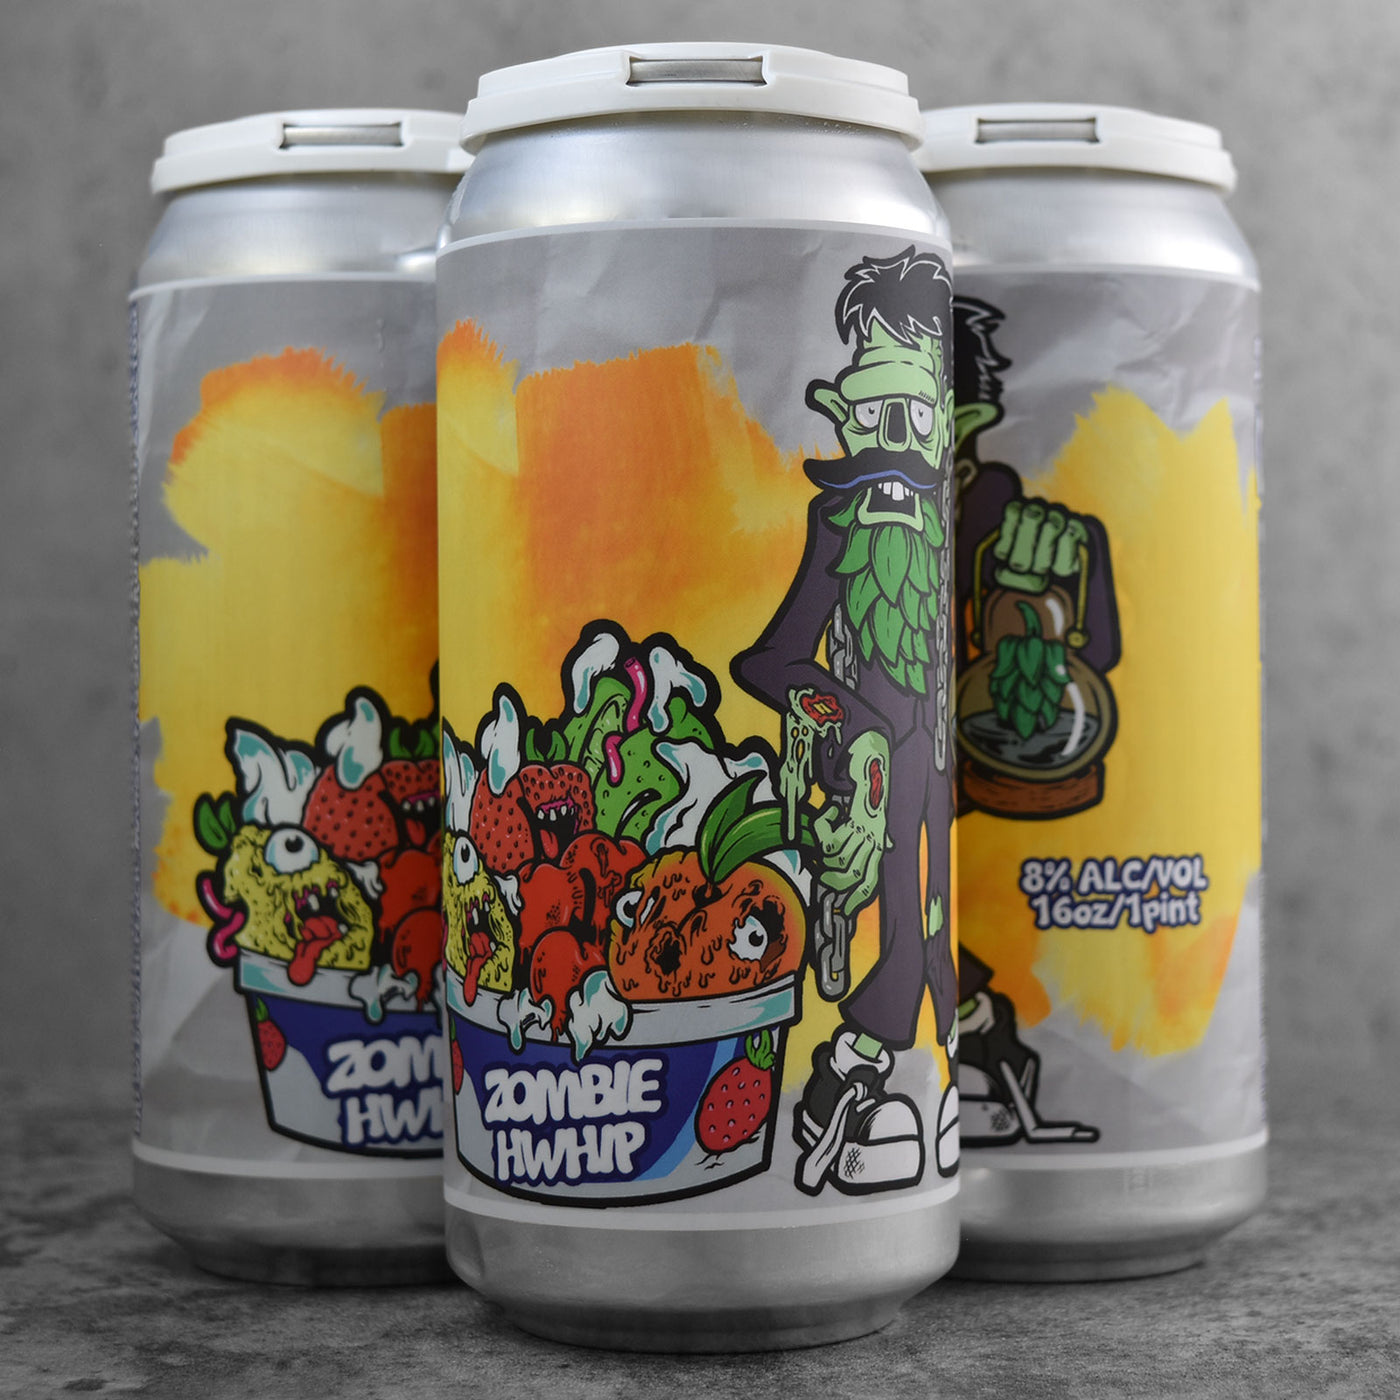 Beer Zombies - Zombie hWhip